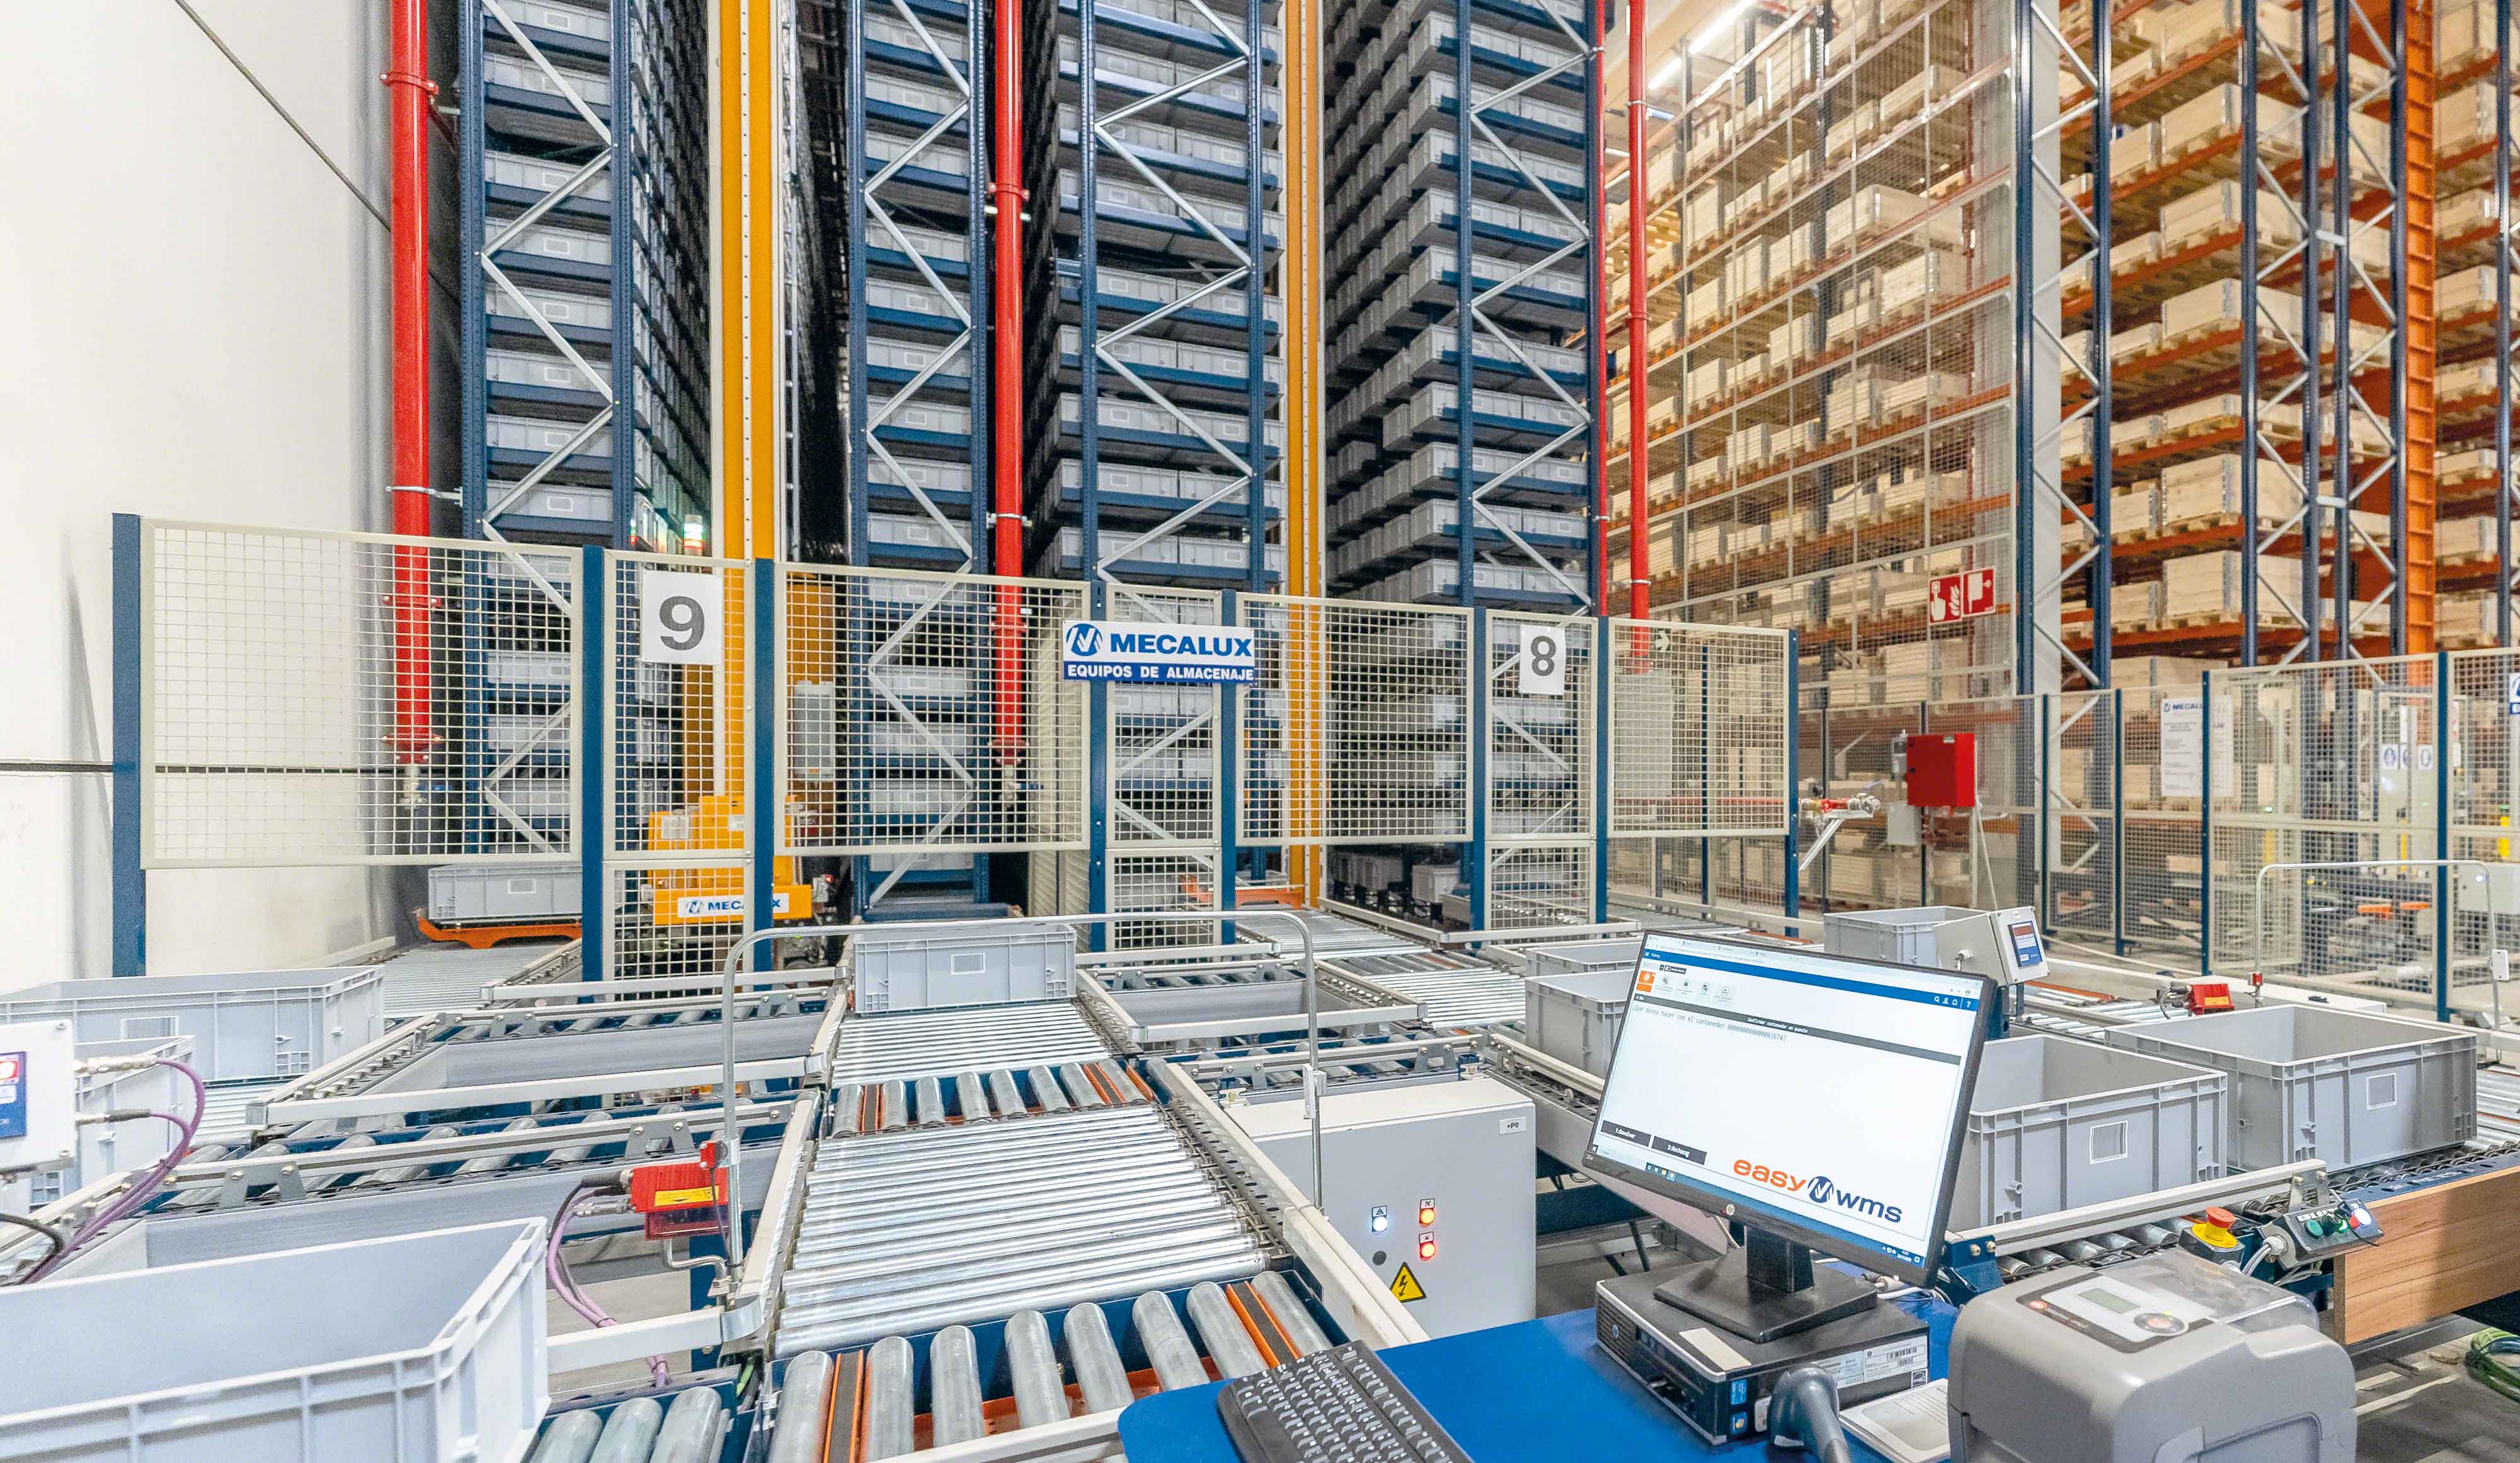 Supply Chain Analytics Software from the Mecalux Group analyses warehouse data